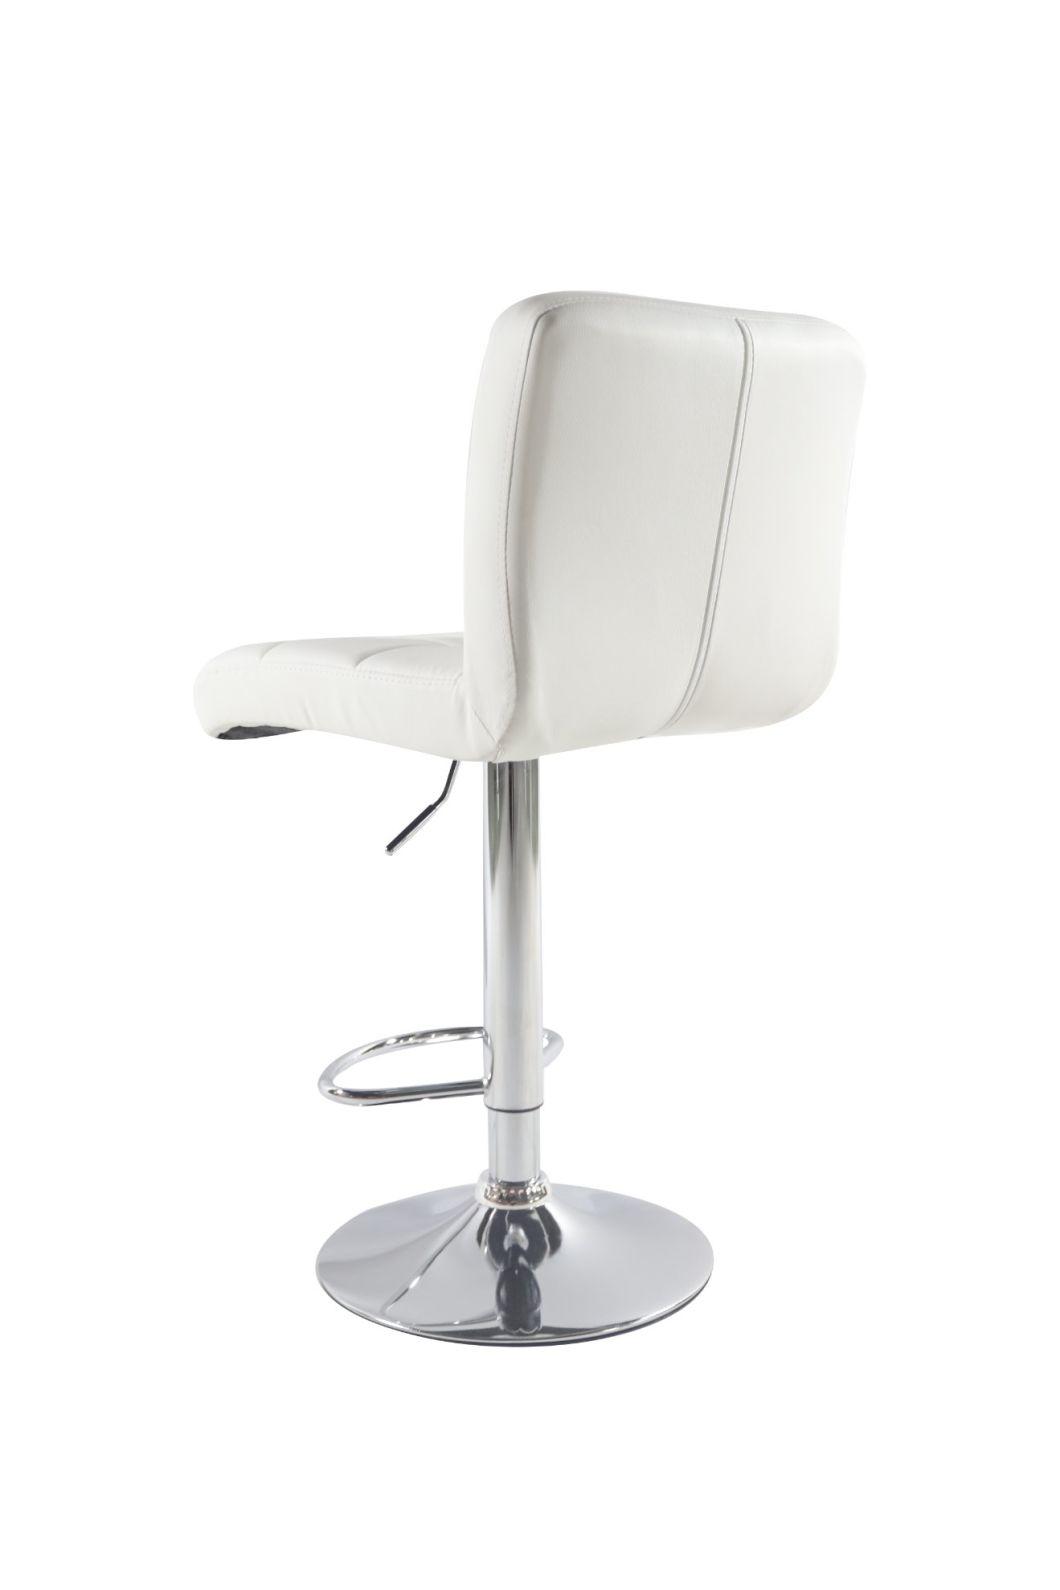 2021 New Modern PU Faux Leather Commercial Swivel Kitchen Bar Stool